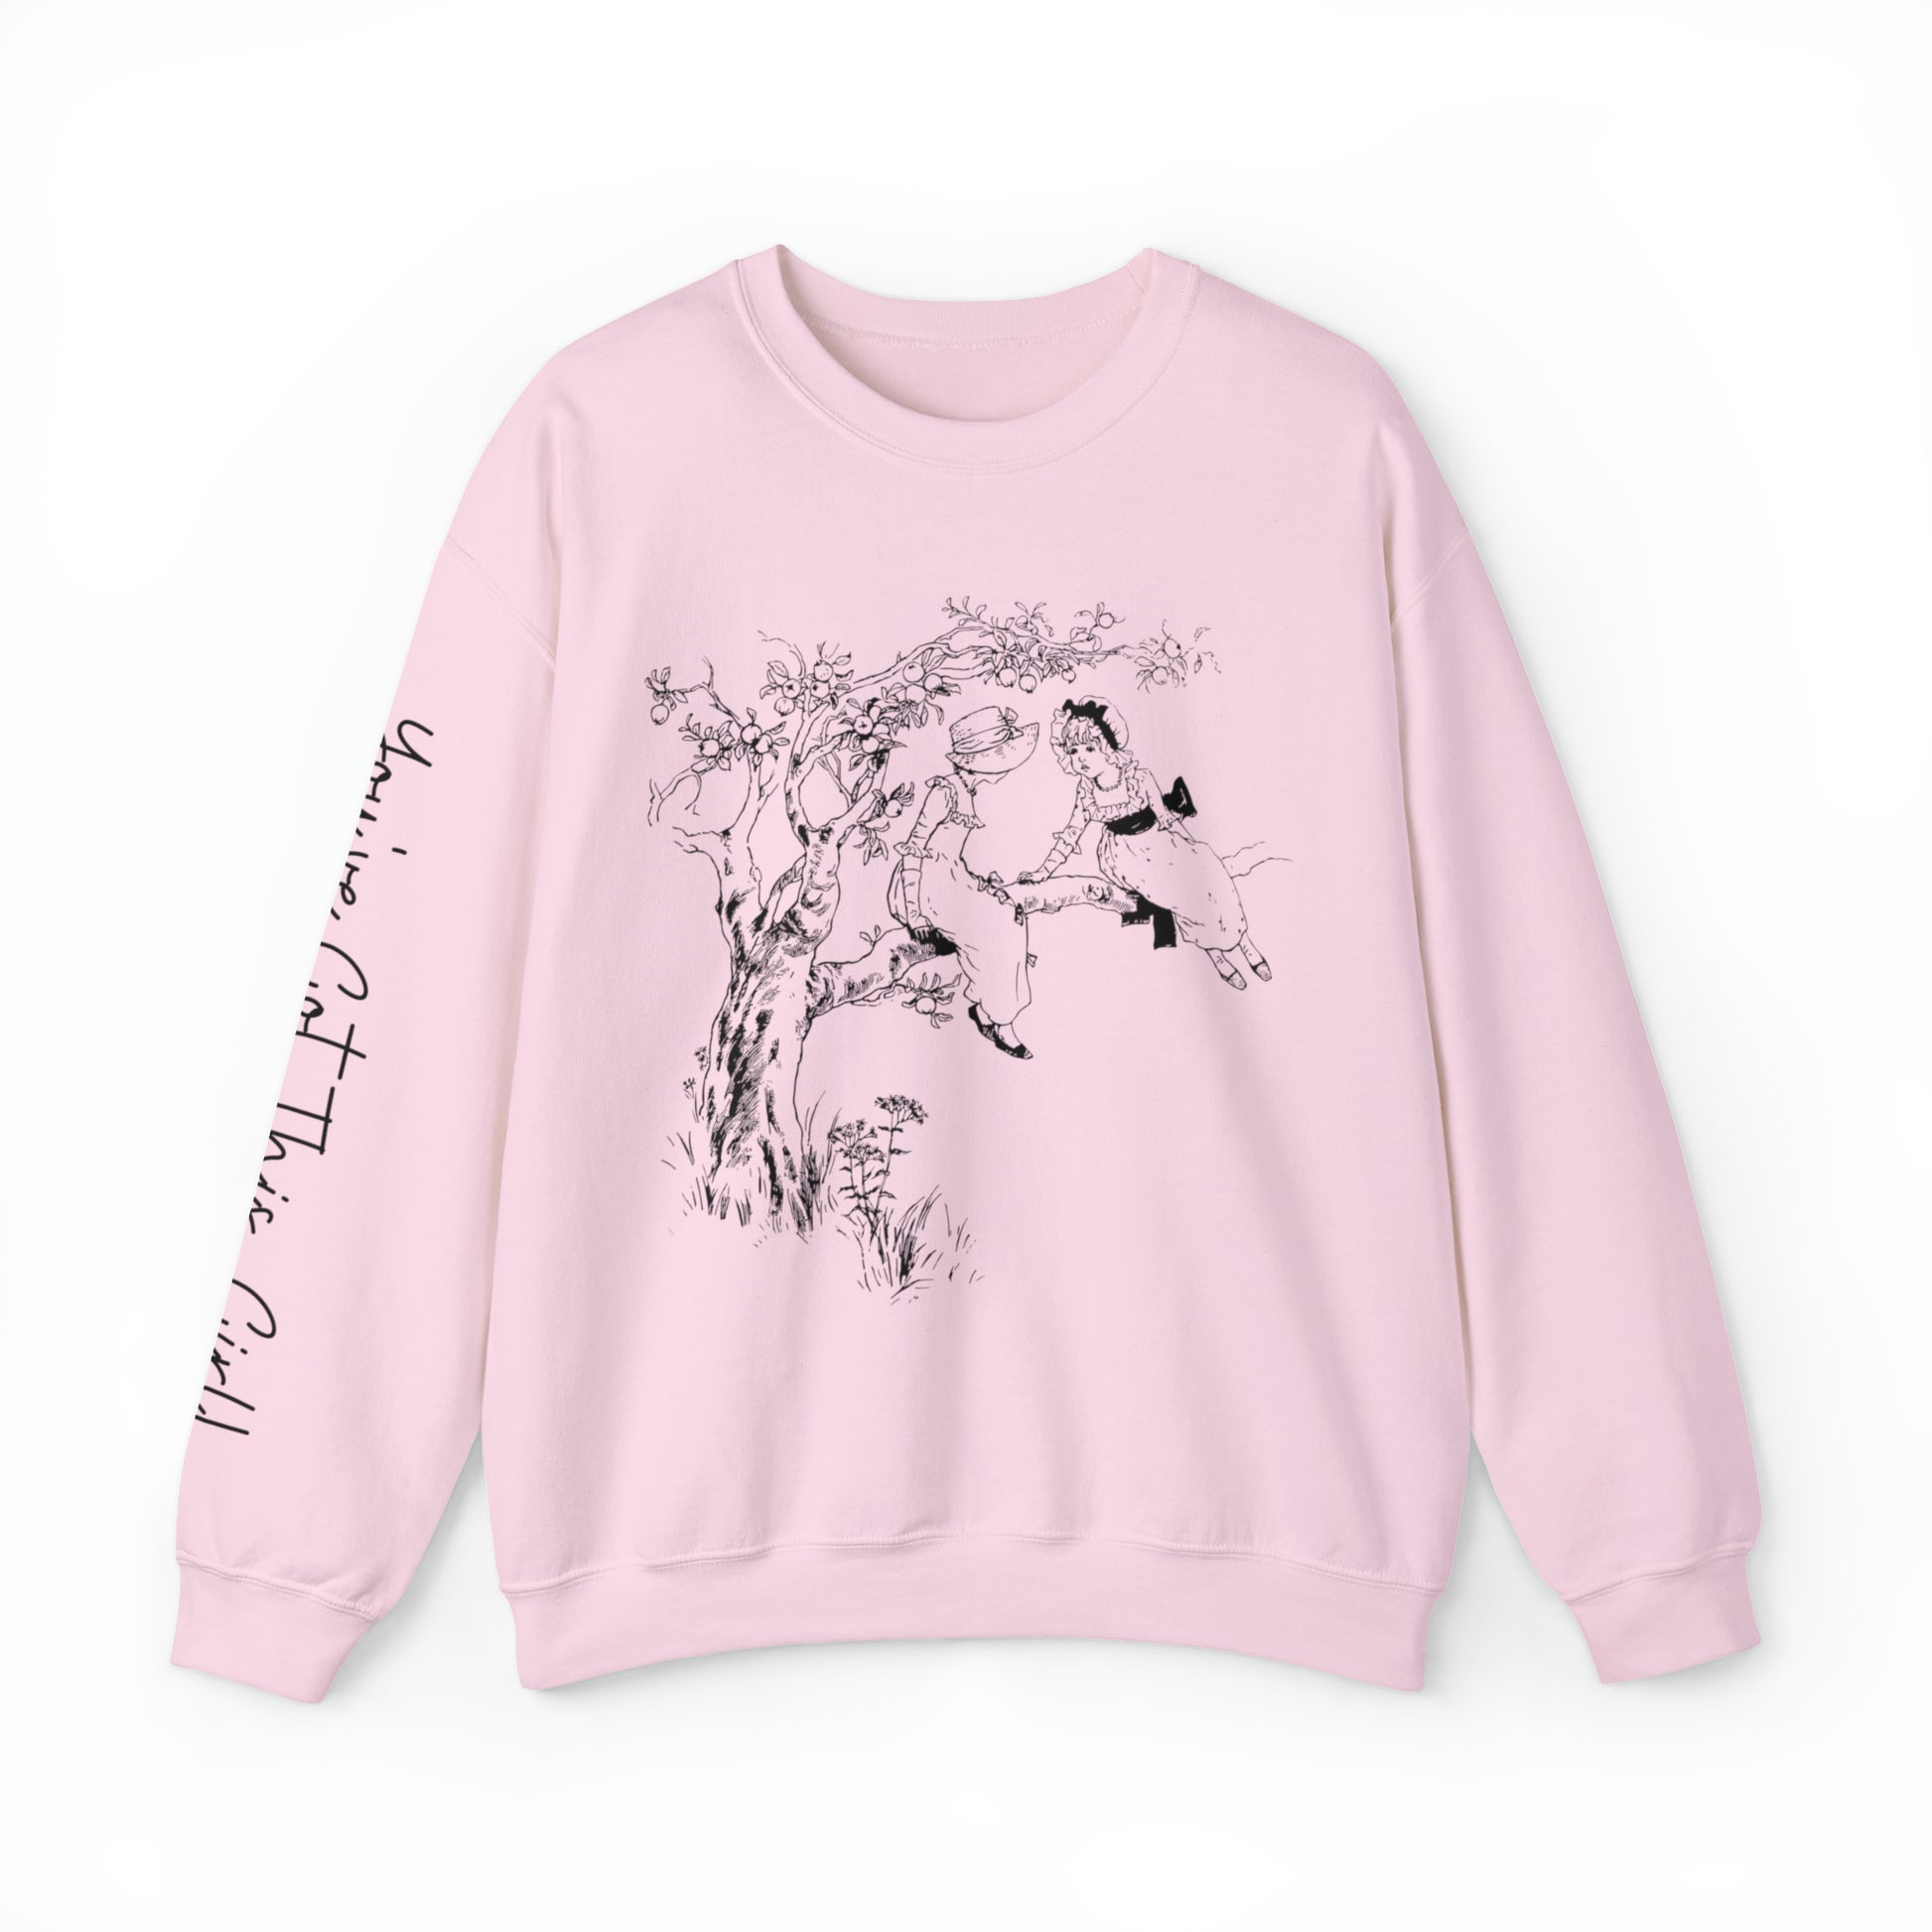 Vintage 'You Got This Girl' Women's Sweatshirt with Tree Art and Arm Detail - Eddy and Rita